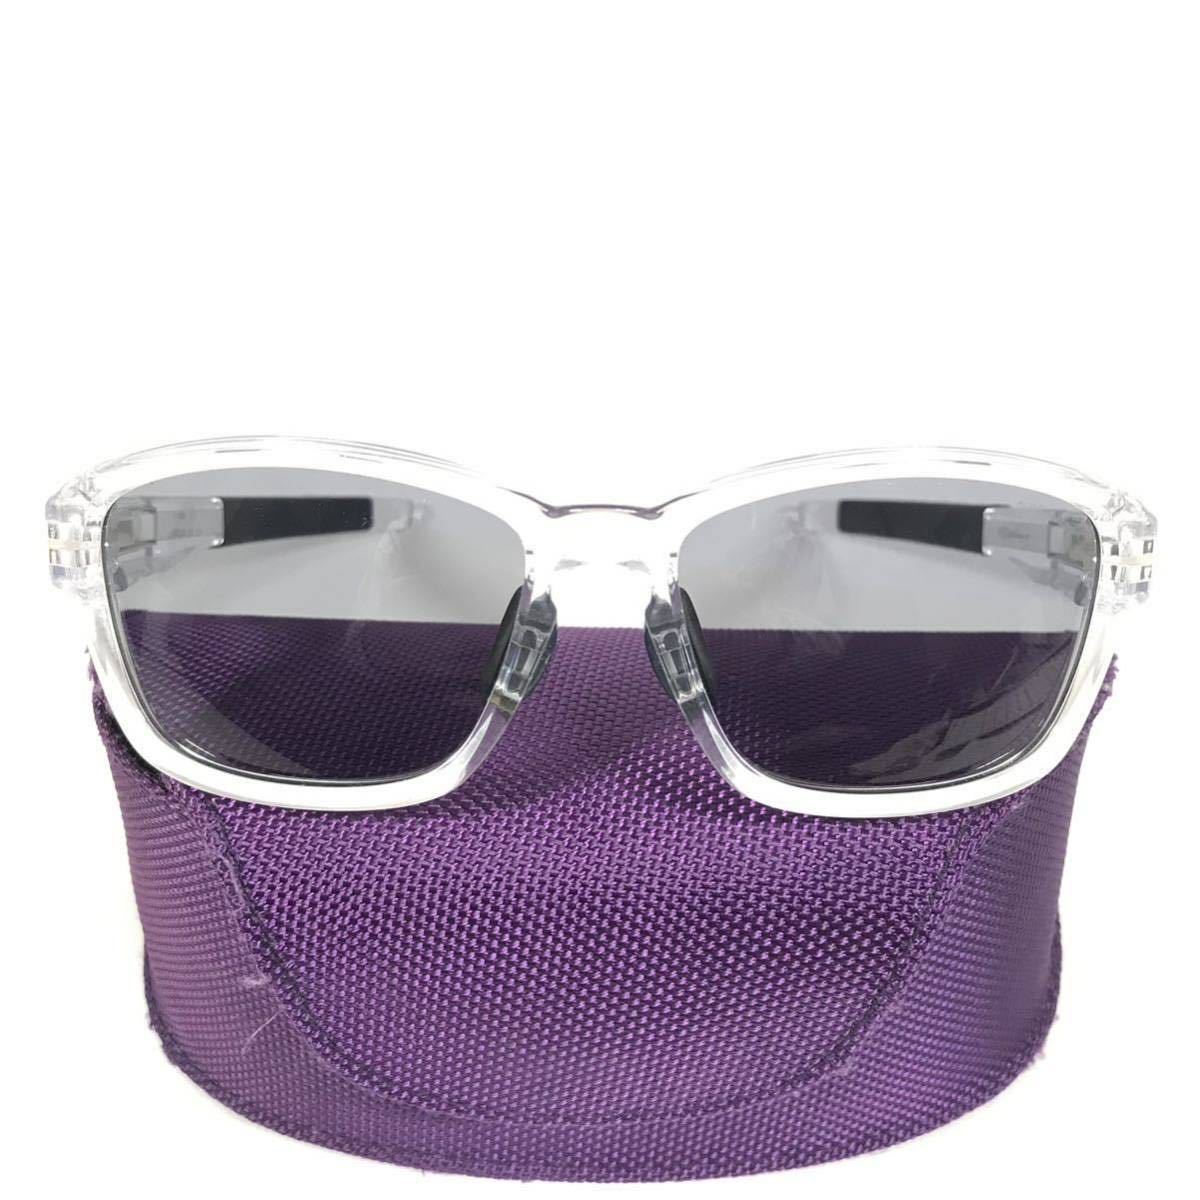 [ four na in z] genuine article 999.9 sunglasses Logo Temple F-14SP clear color series × gray men's lady's made in Japan storage bag case attaching postage 520 jpy 